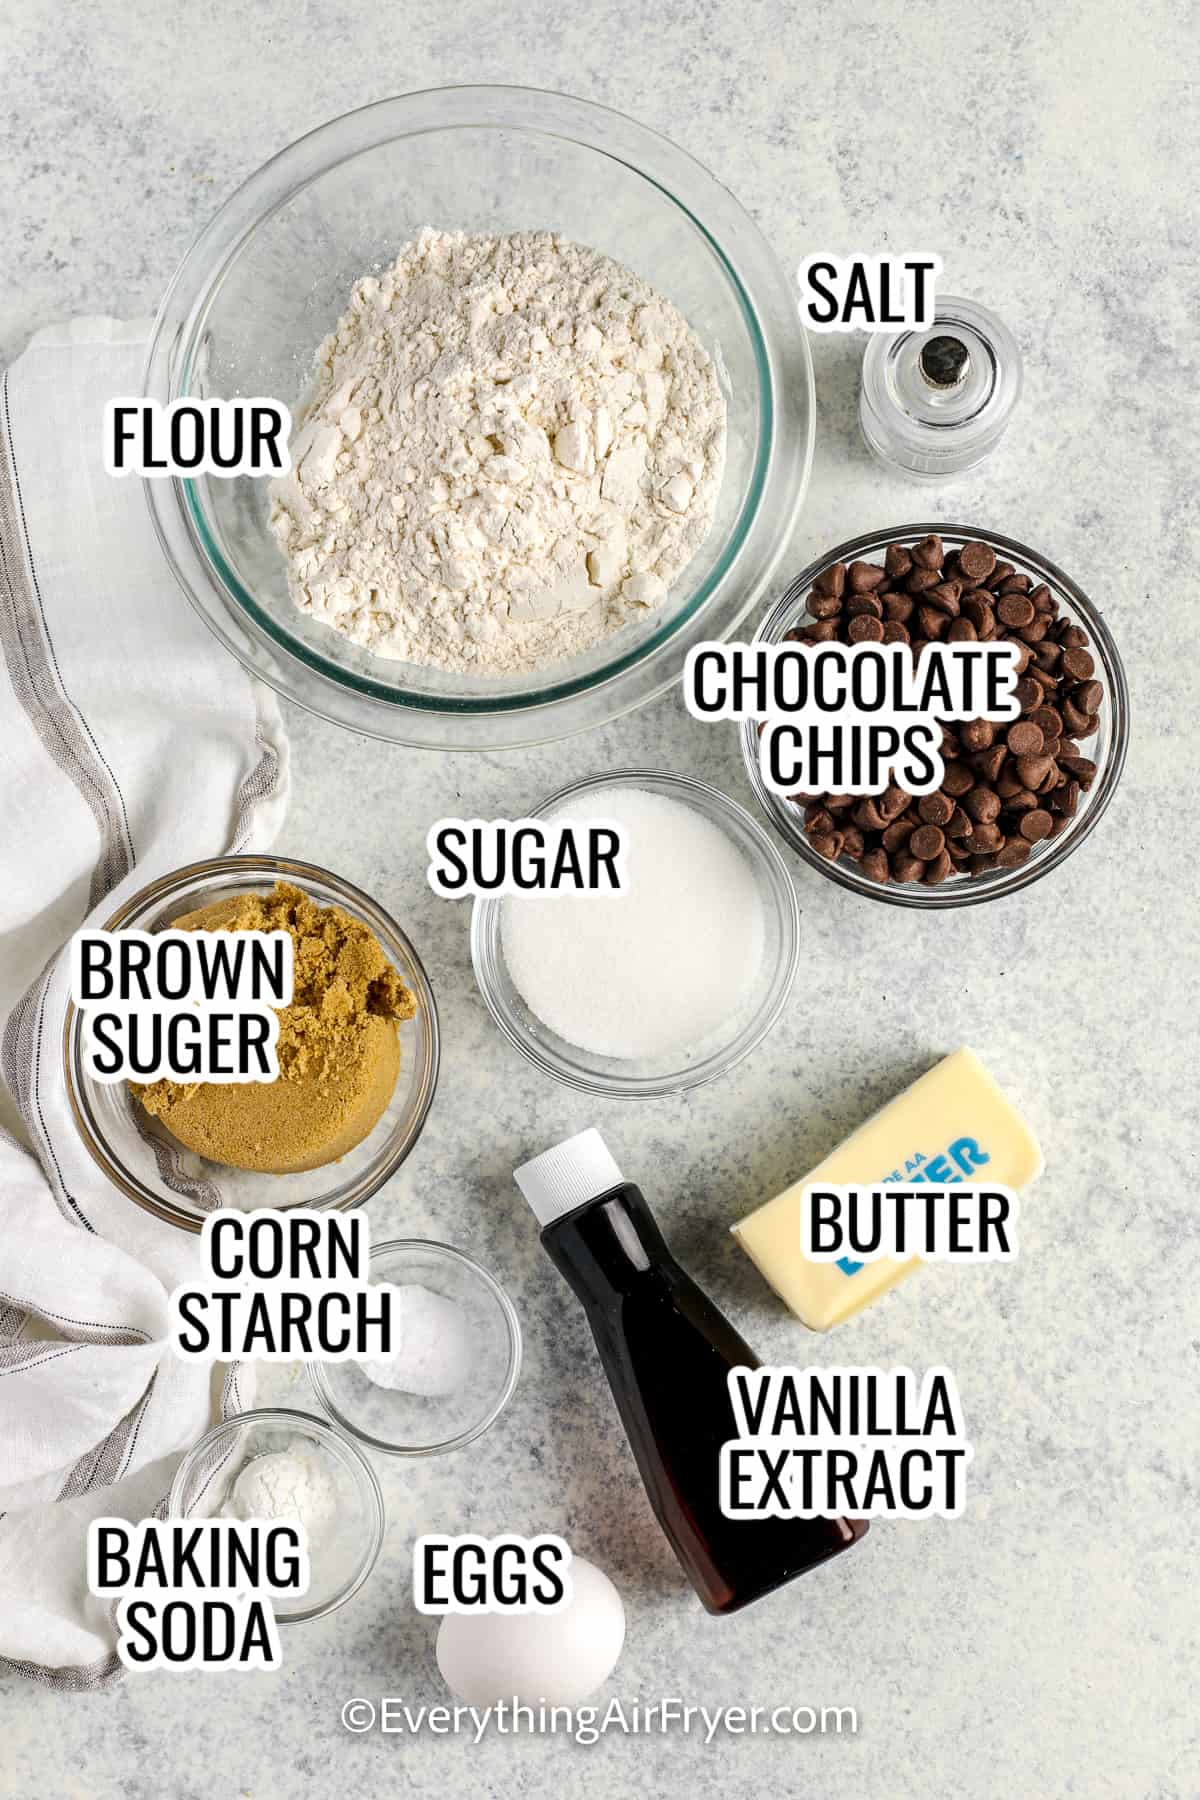 ingredients assembled to make air fryer cookies including sugar, flour, chocolate chips, butter, vanilla, salt, eggs, baking soda, and cork starch